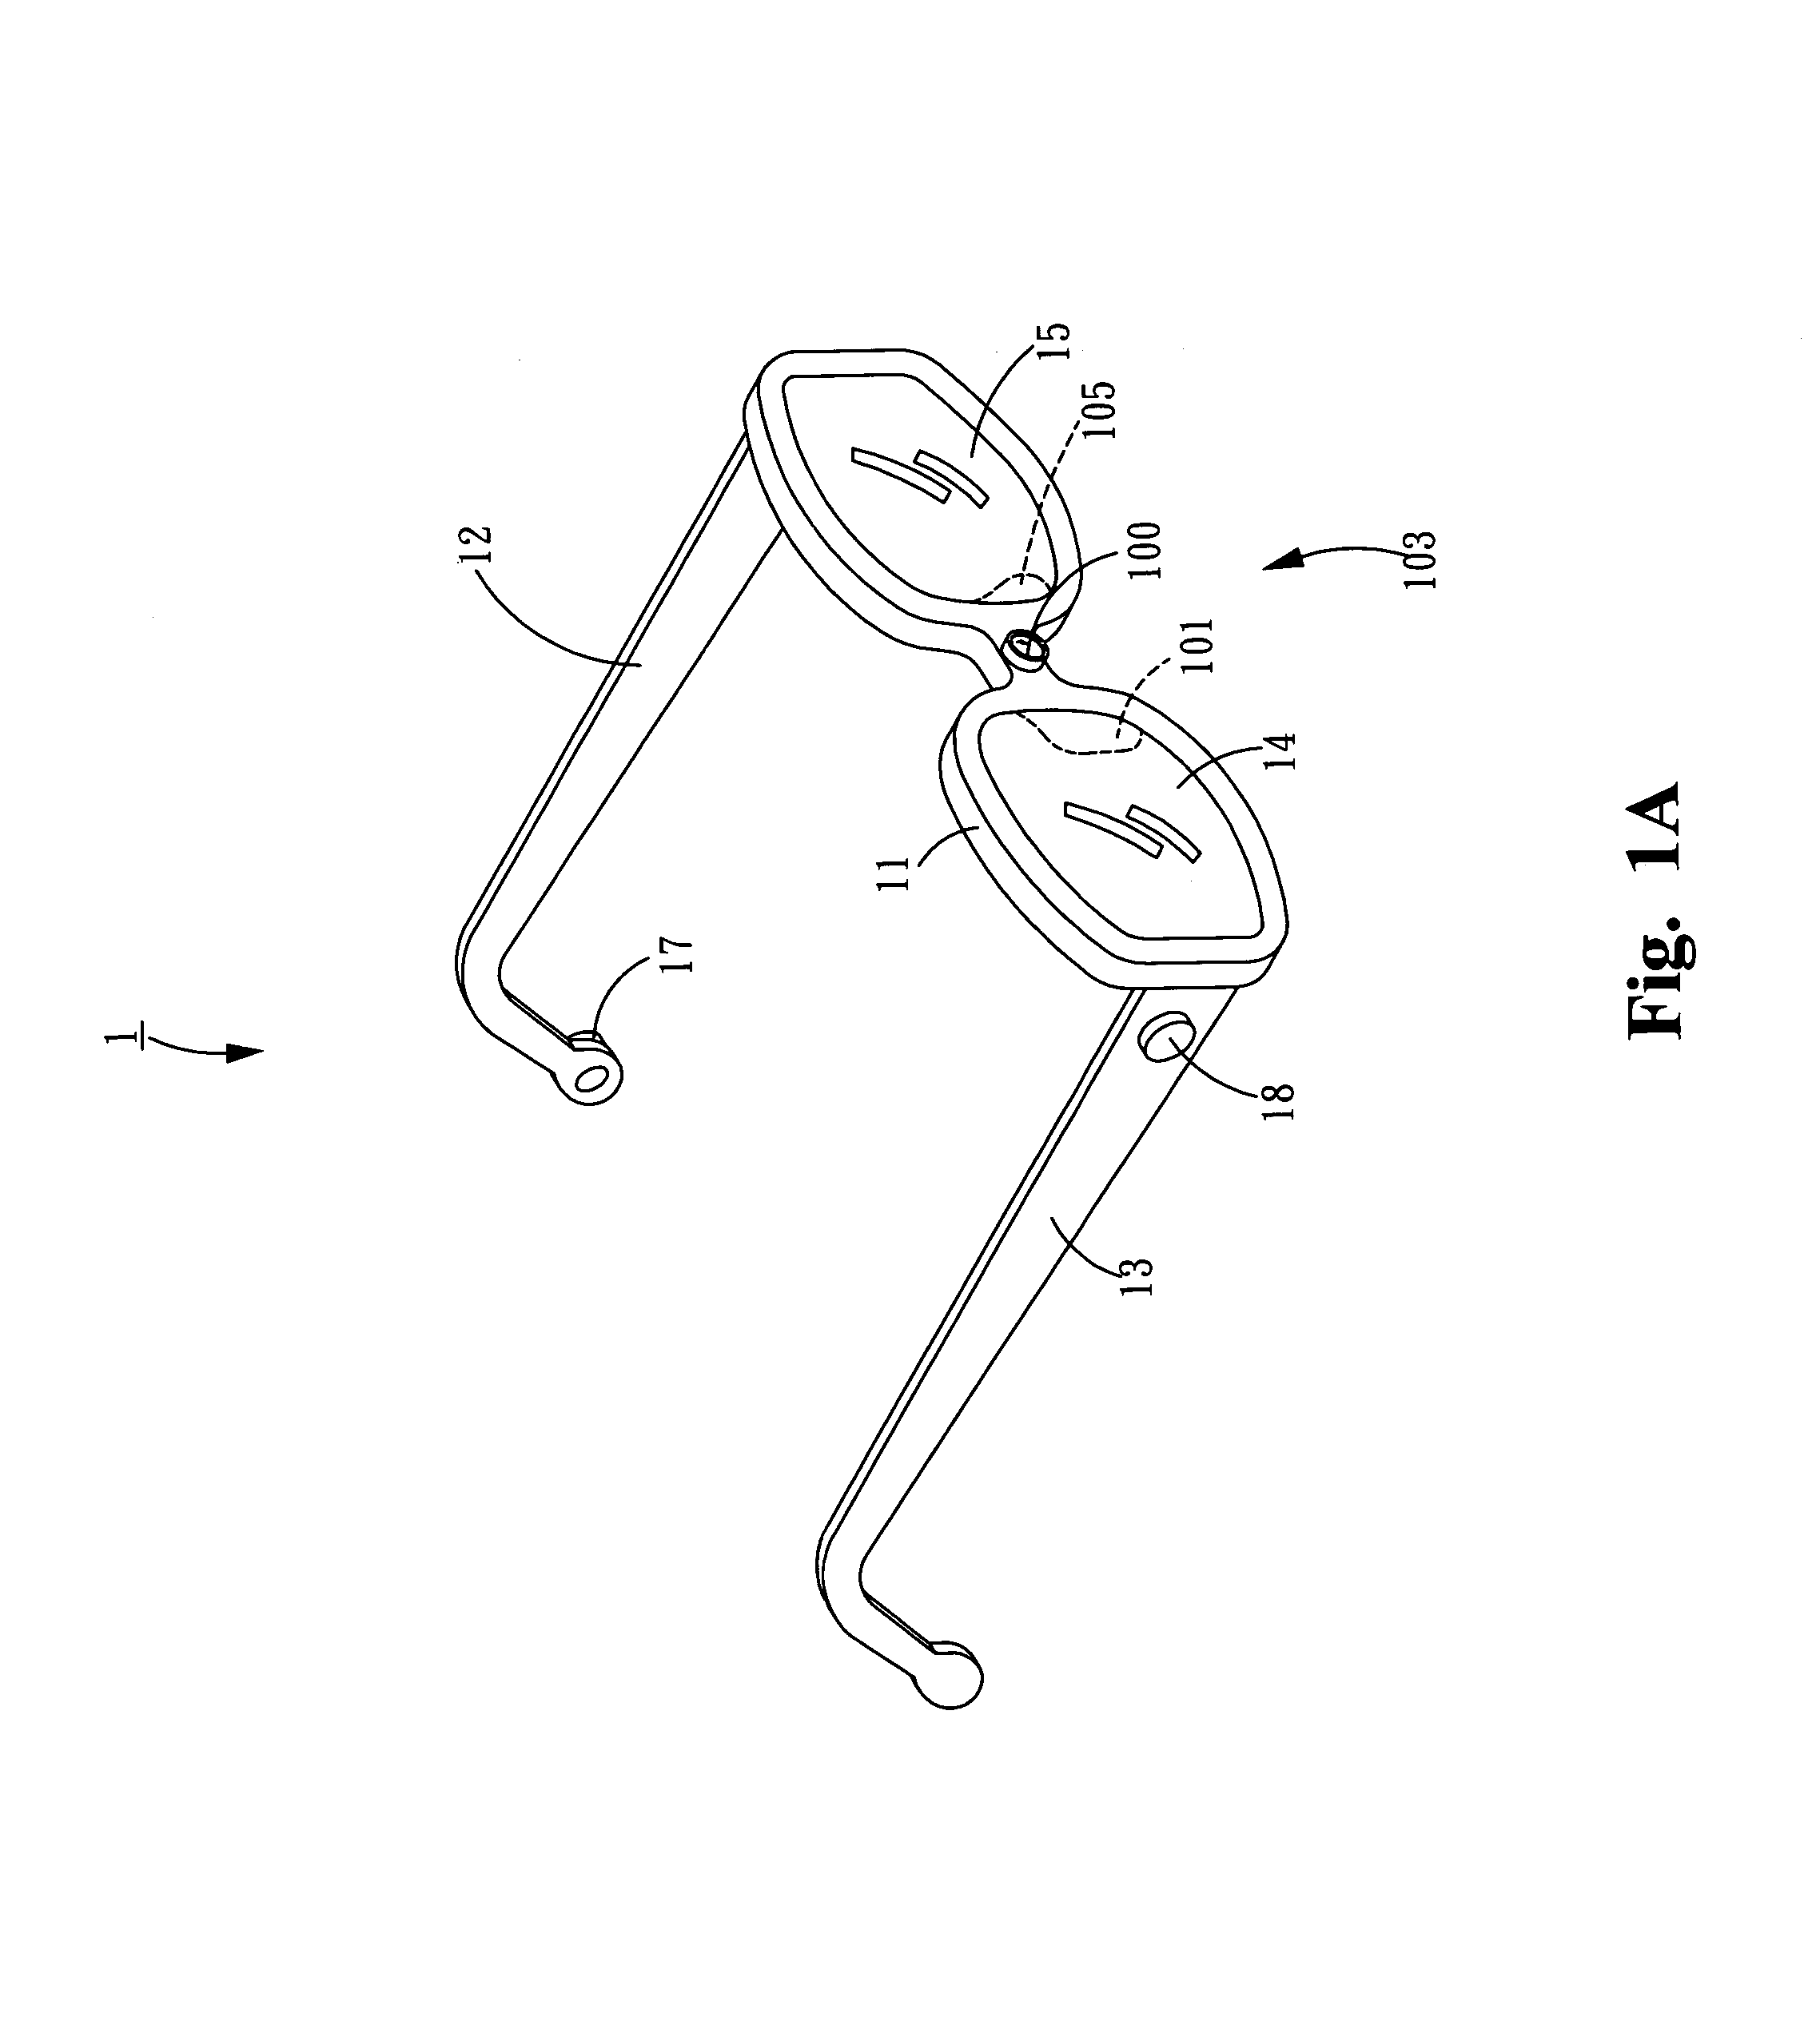 Focus adjustable head mounted display system and method and device for realizing the system